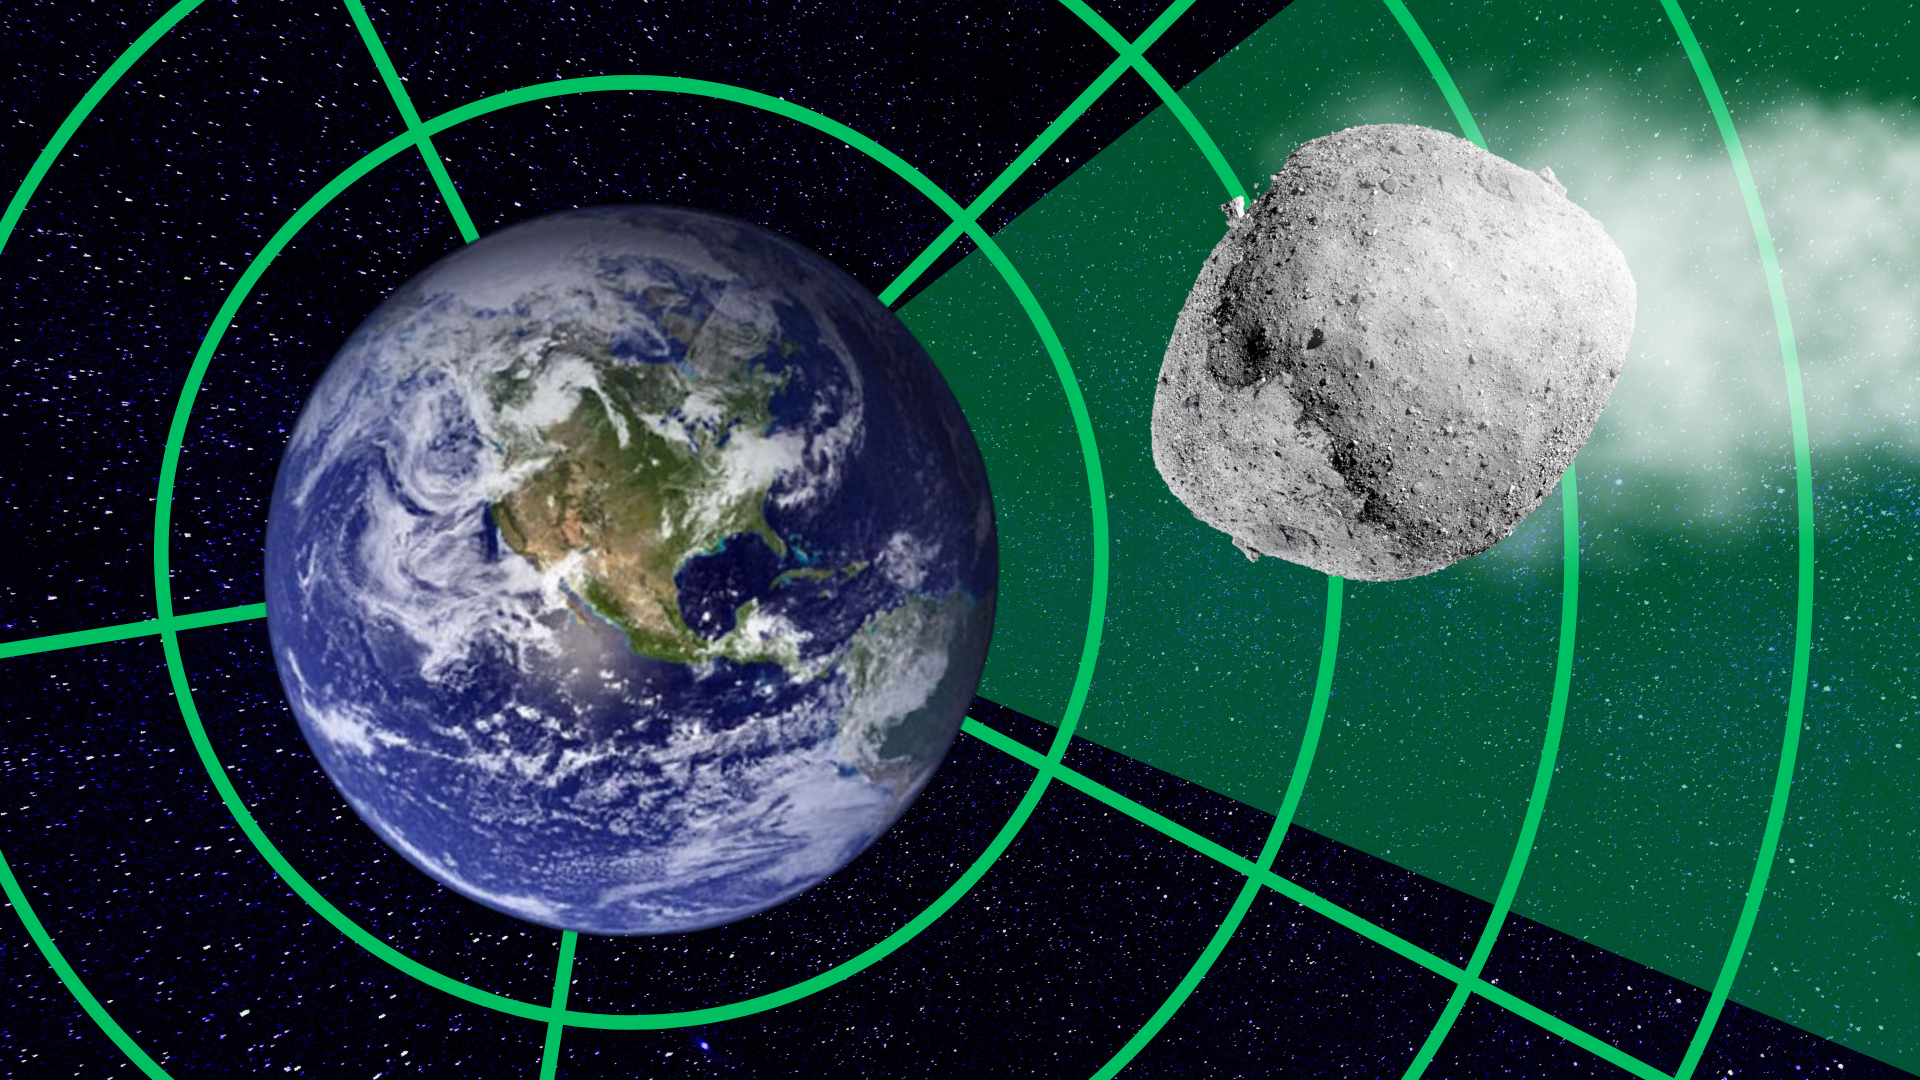 Radar could help scientists find potentially threatening asteroids. Here’s how Space